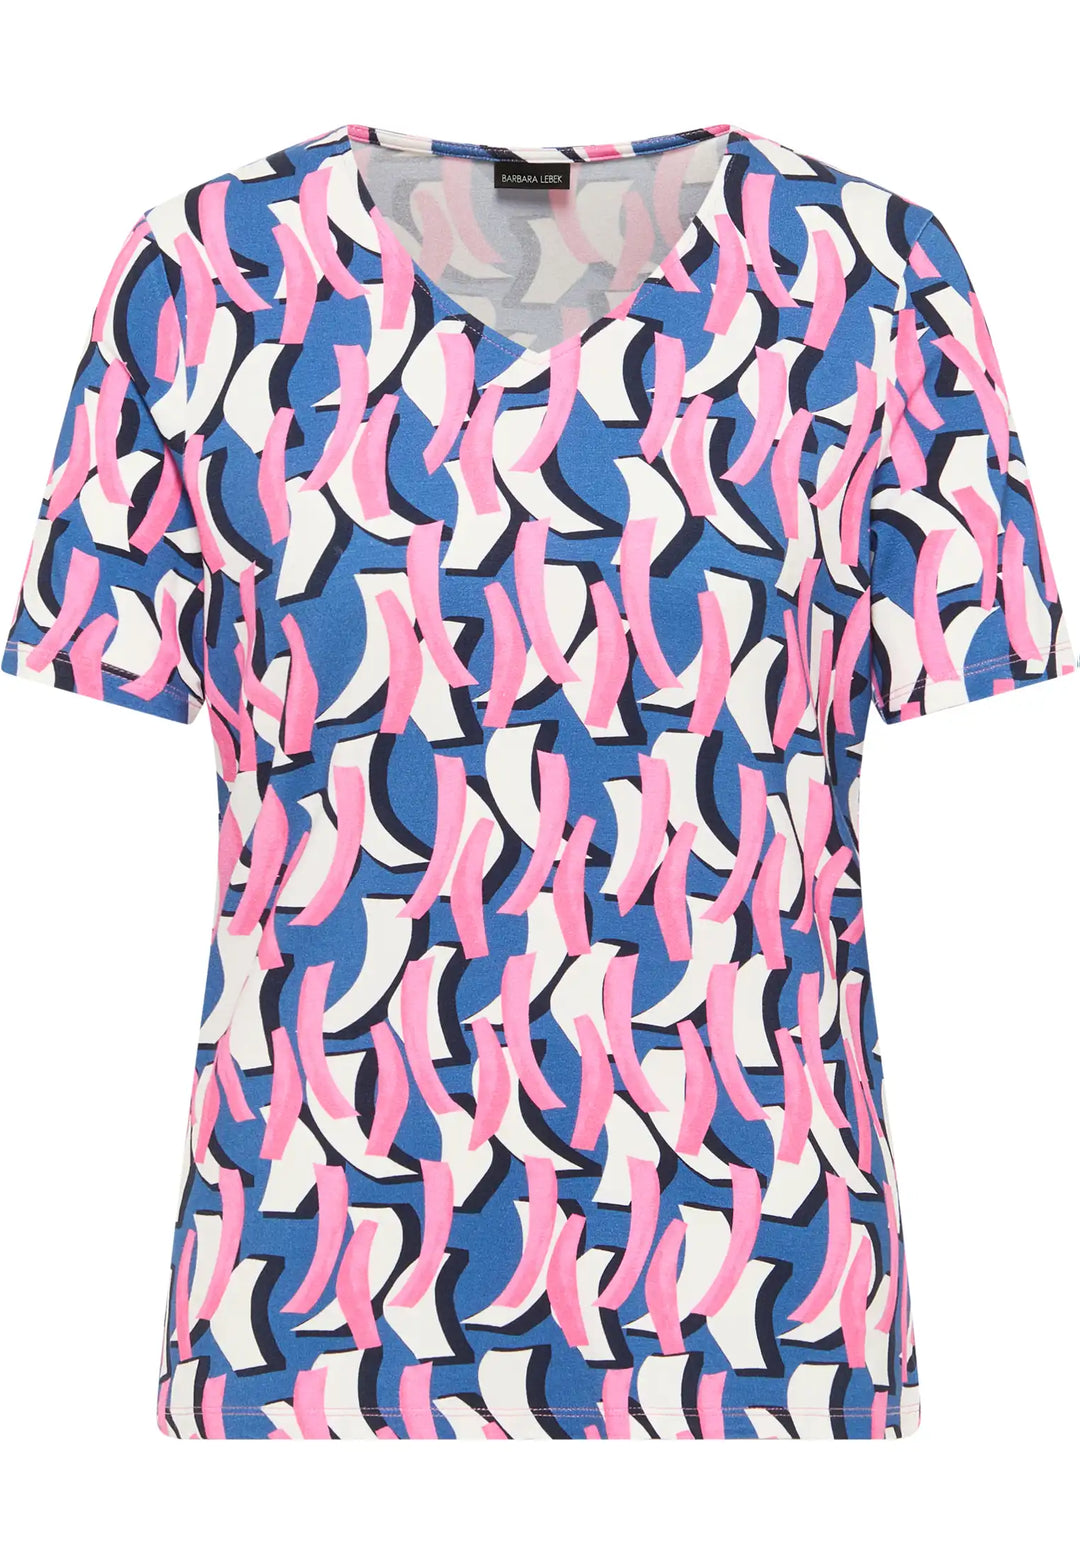 Vibrant pink and navy ribbon print top with  V-neckline and casual fit, Style 62000042-530